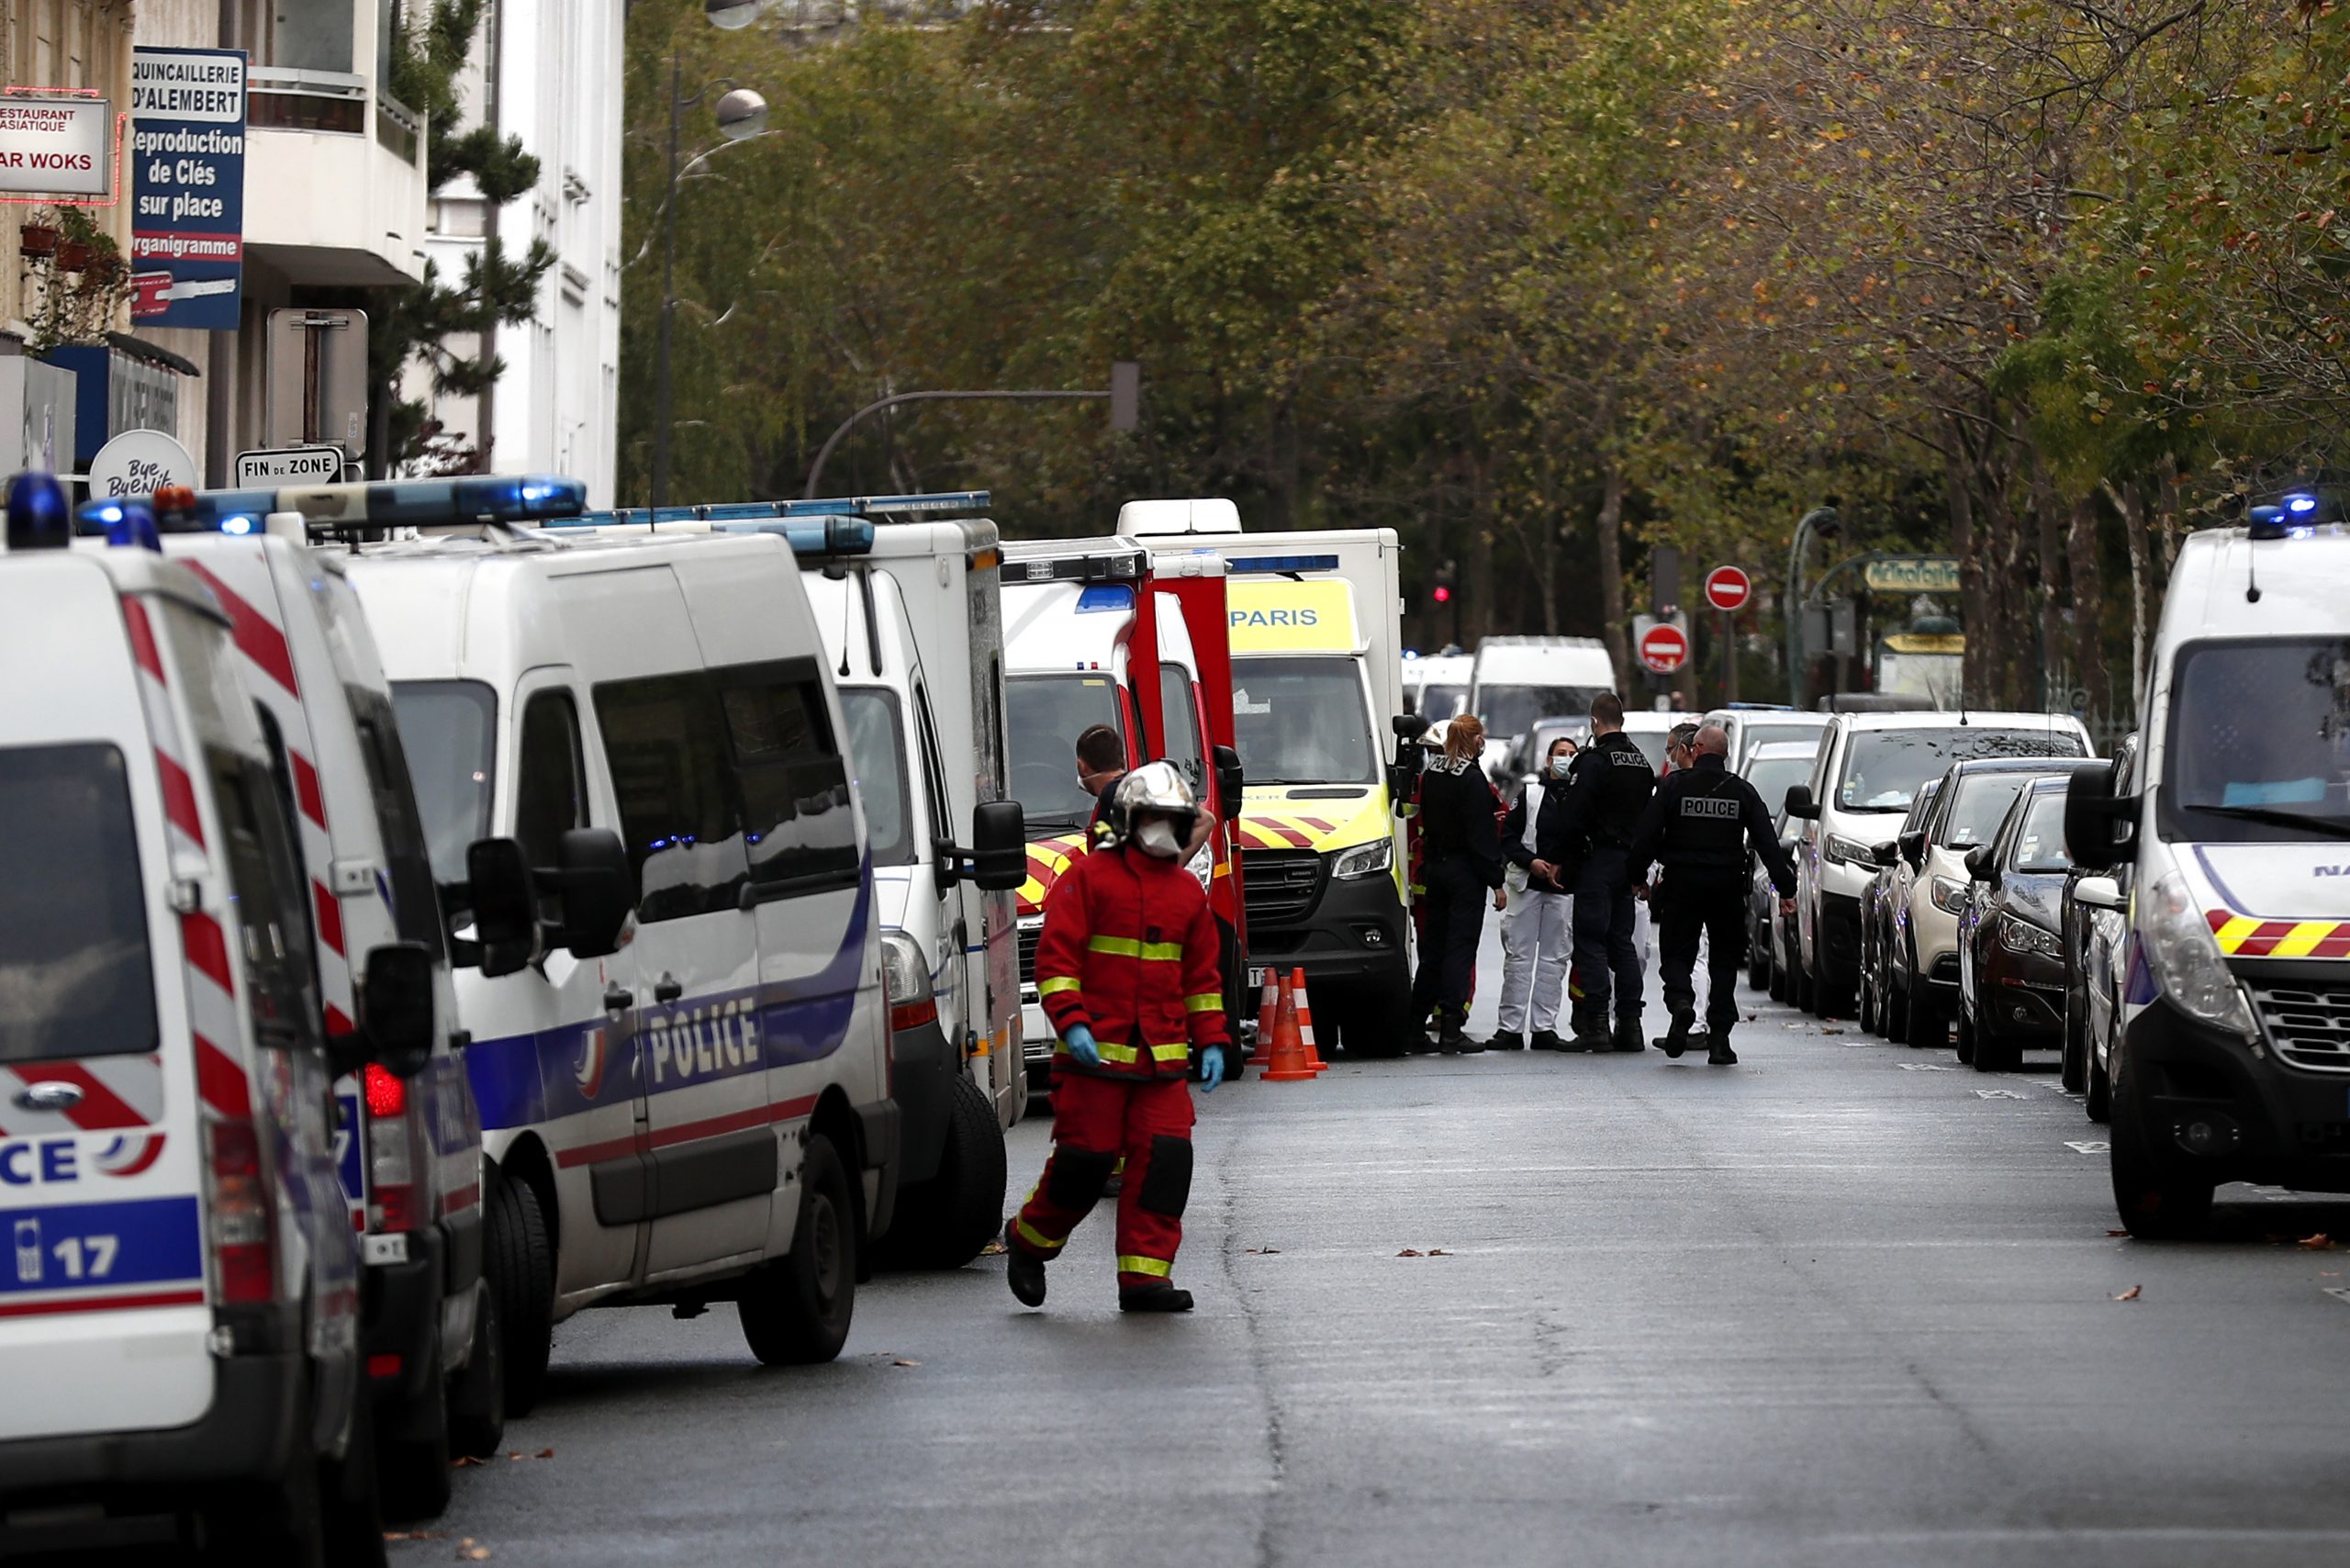 epa08696039 French police and rescue team stand at a security perimeter near the former Charlie Hebdo offices, in Paris, France, 25 September 2020, after four people have been wounded in knife attack. According to recent reports, two assailants are on the run.  EPA/IAN LANGSDON